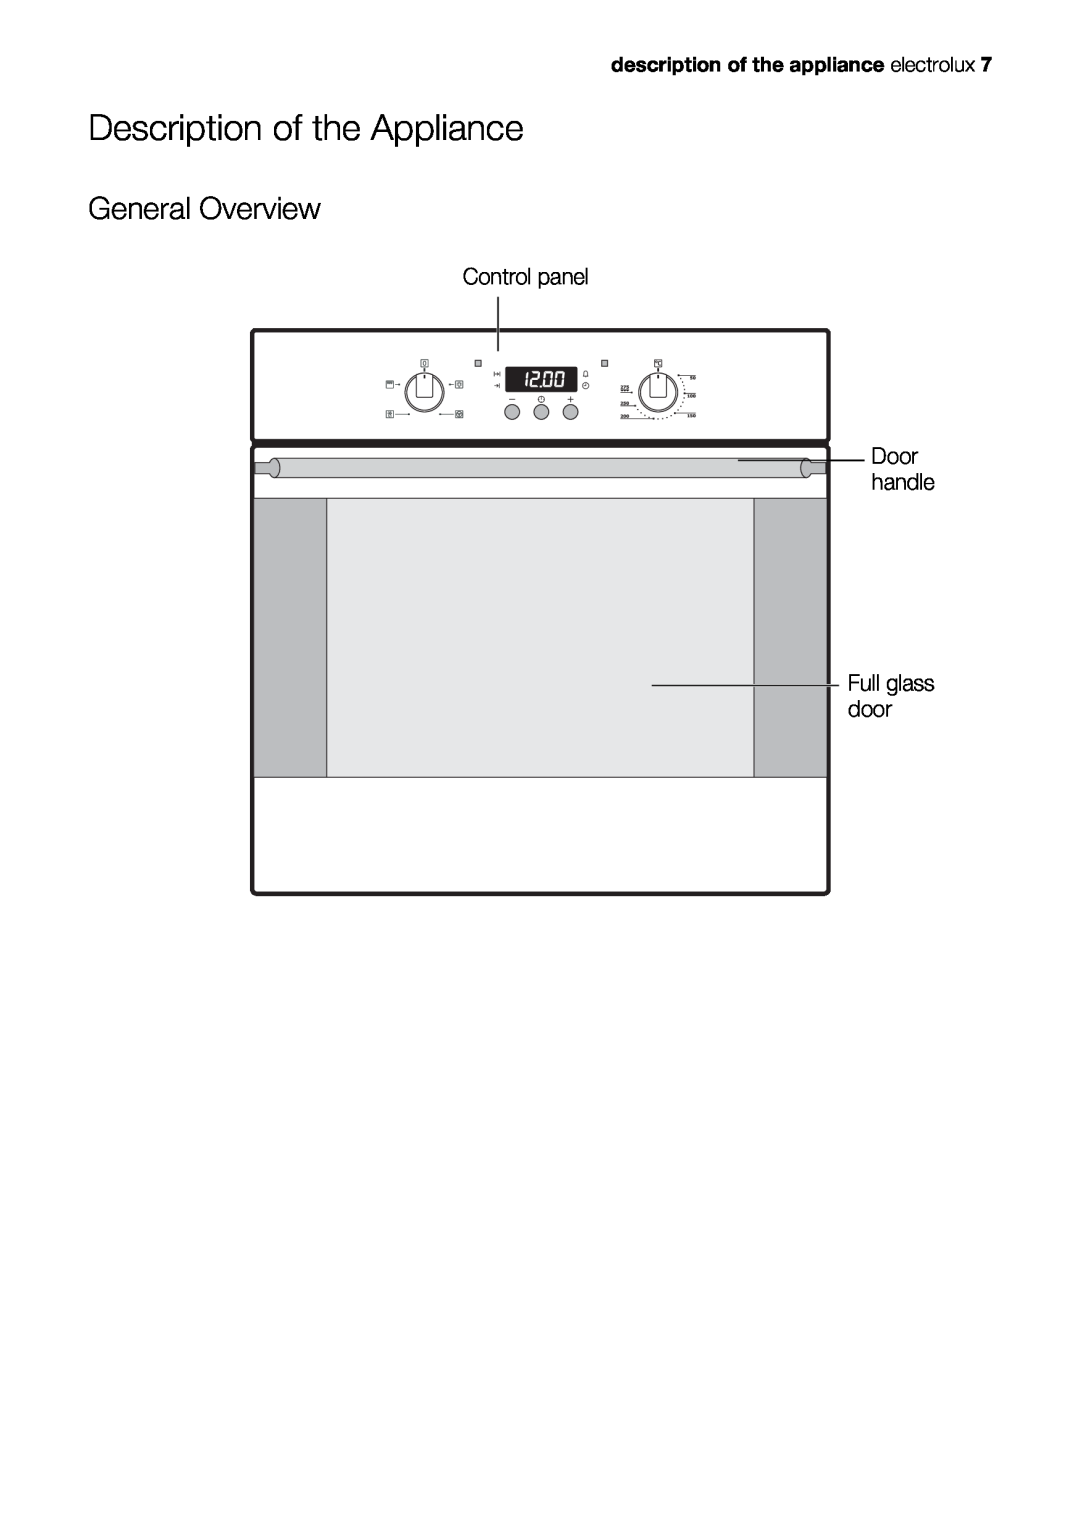 Electrolux EOB53000 user manual Description of the Appliance, General Overview 